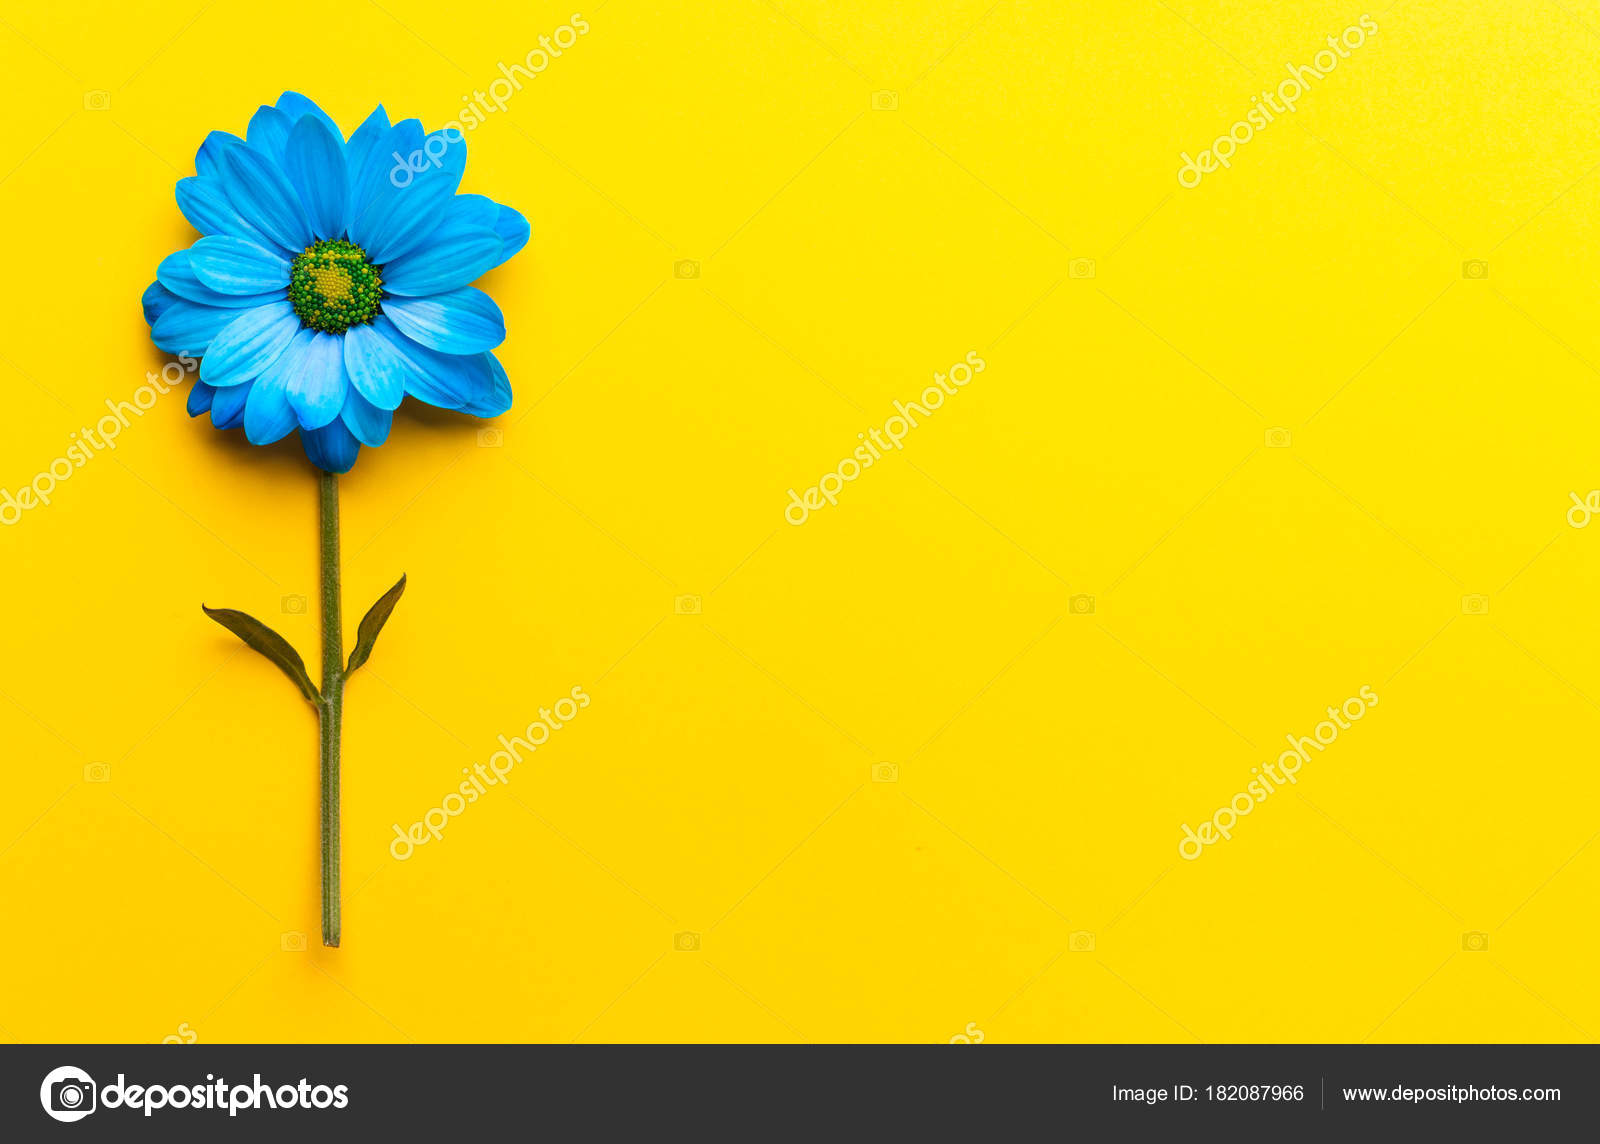 Flowers on yellow background Beautiful images - Free download